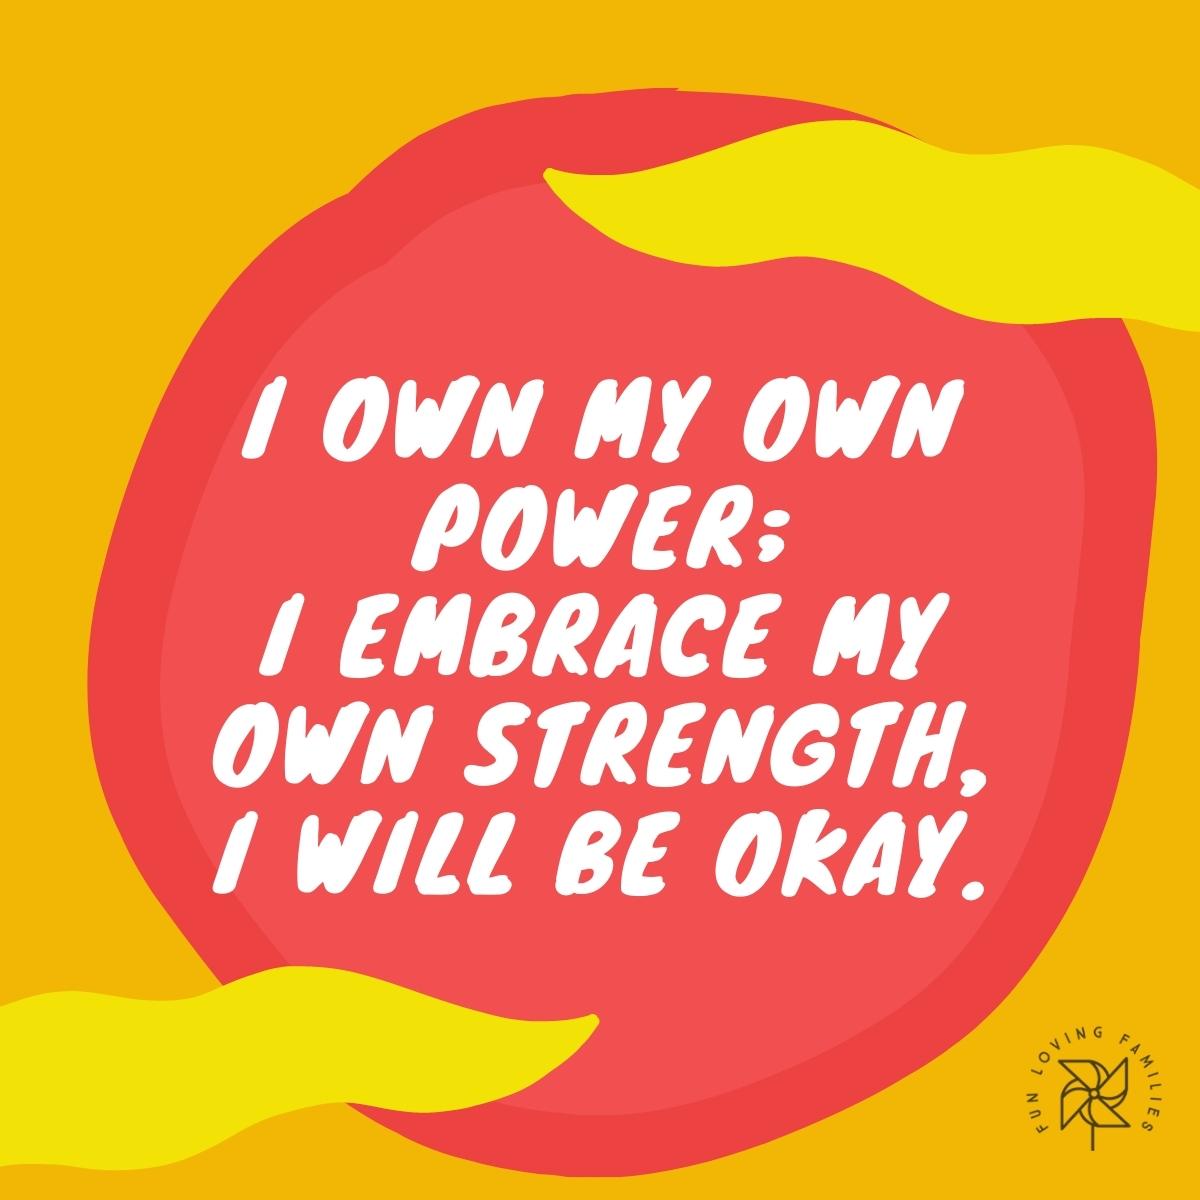 I own my own power affirmation